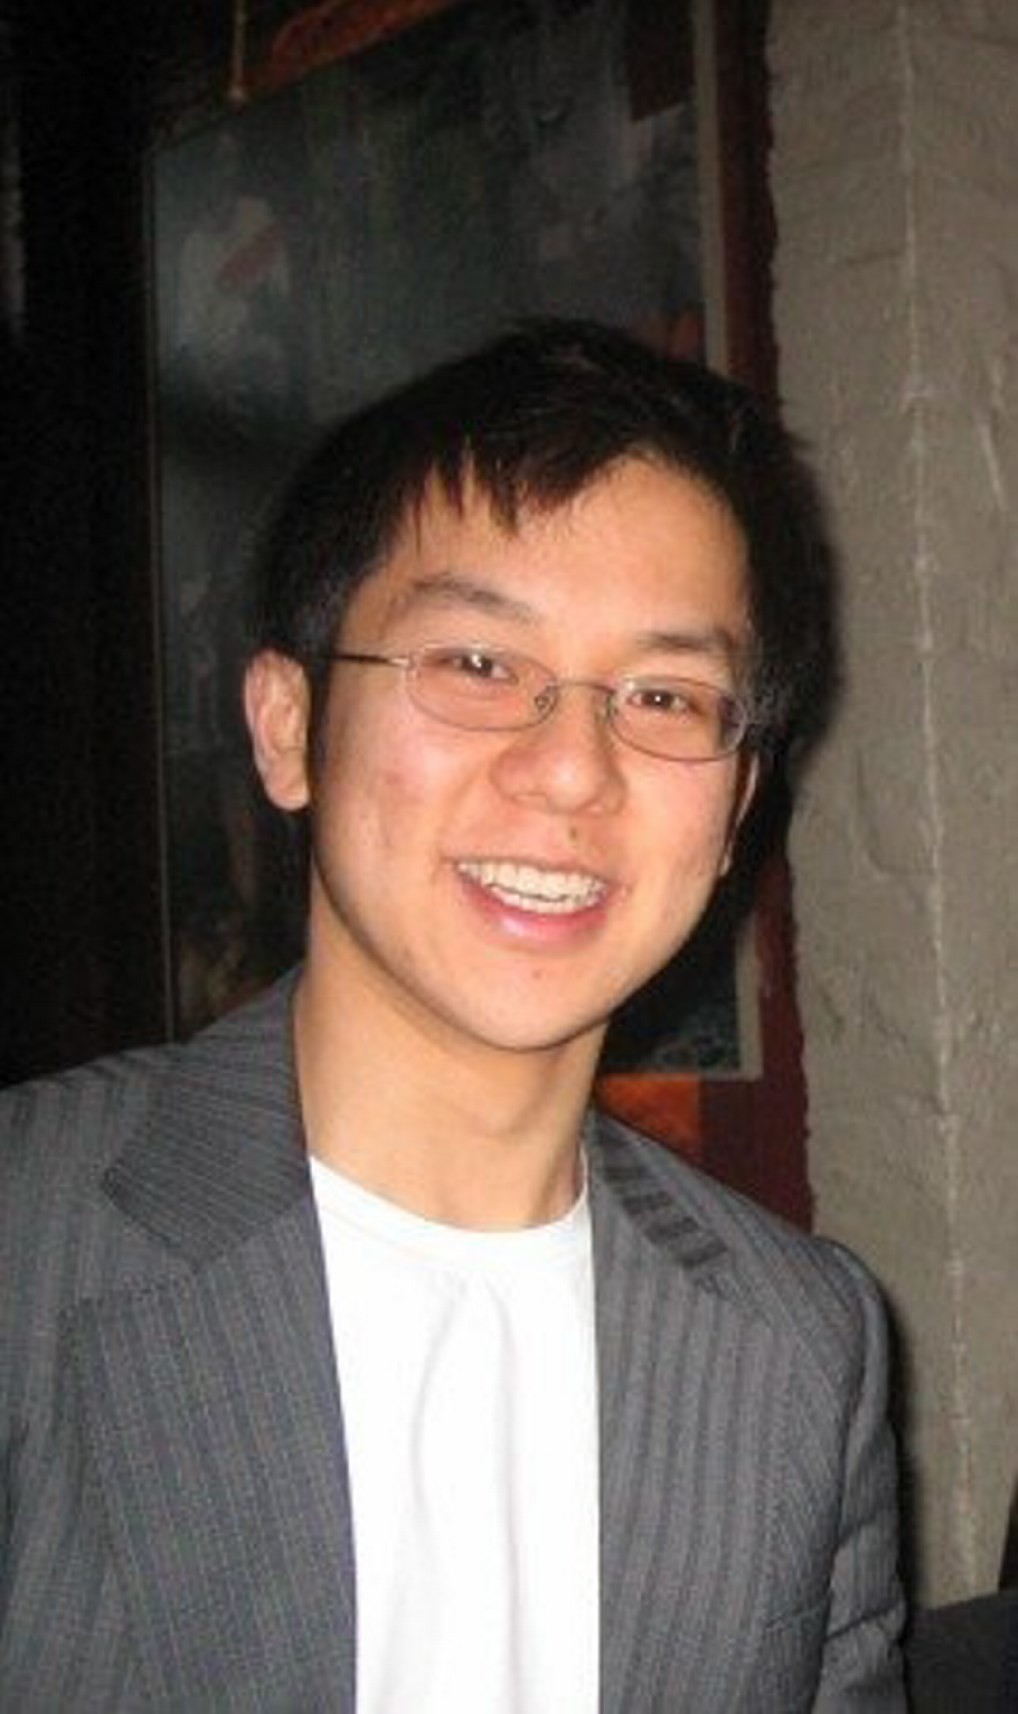 19-04-2007. INS News Agency Ltd.Picture by INS.Collect picture of Tsz Fok, Oxford University genius who was killed under the wheels of a dustcart in Oxford. The 21 year old had a brilliant academic career and had already had books published..See copy